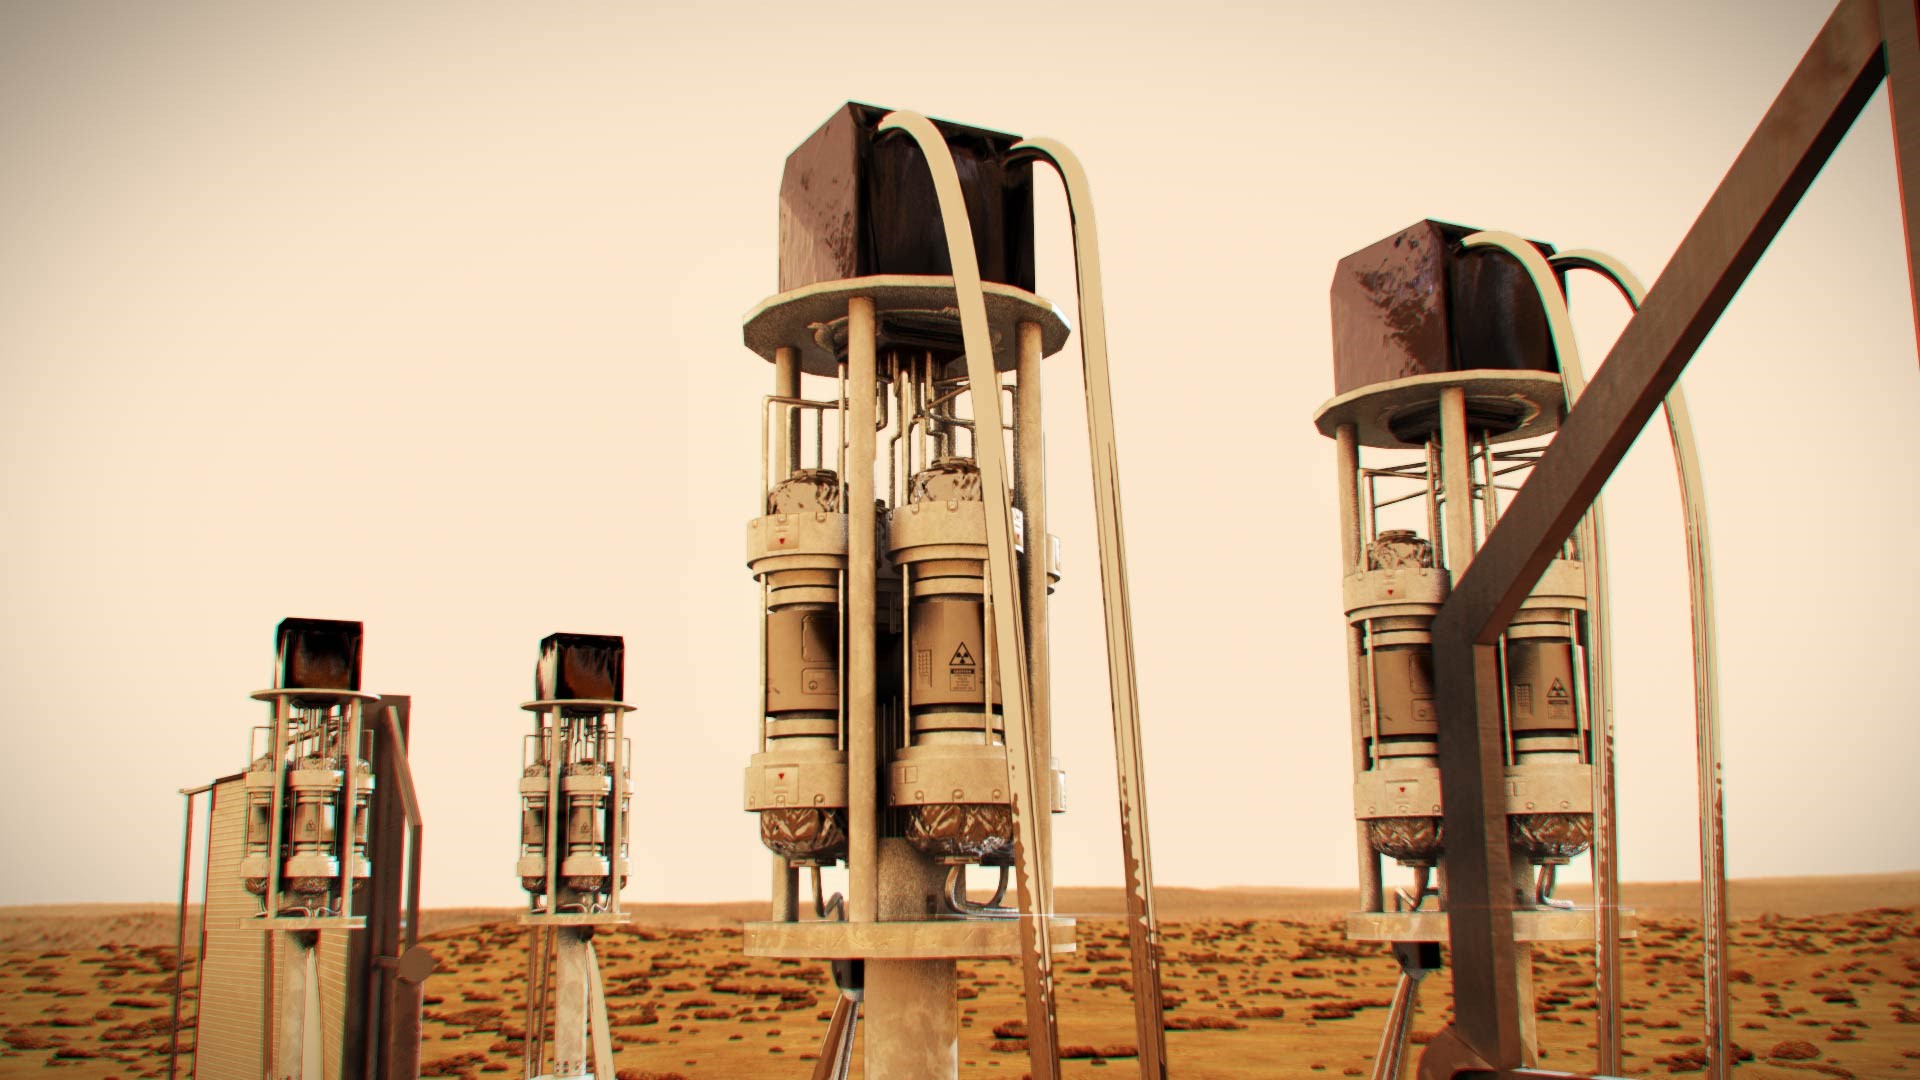 Colour illustration of a four towers of power equipment on the surface of Mars.